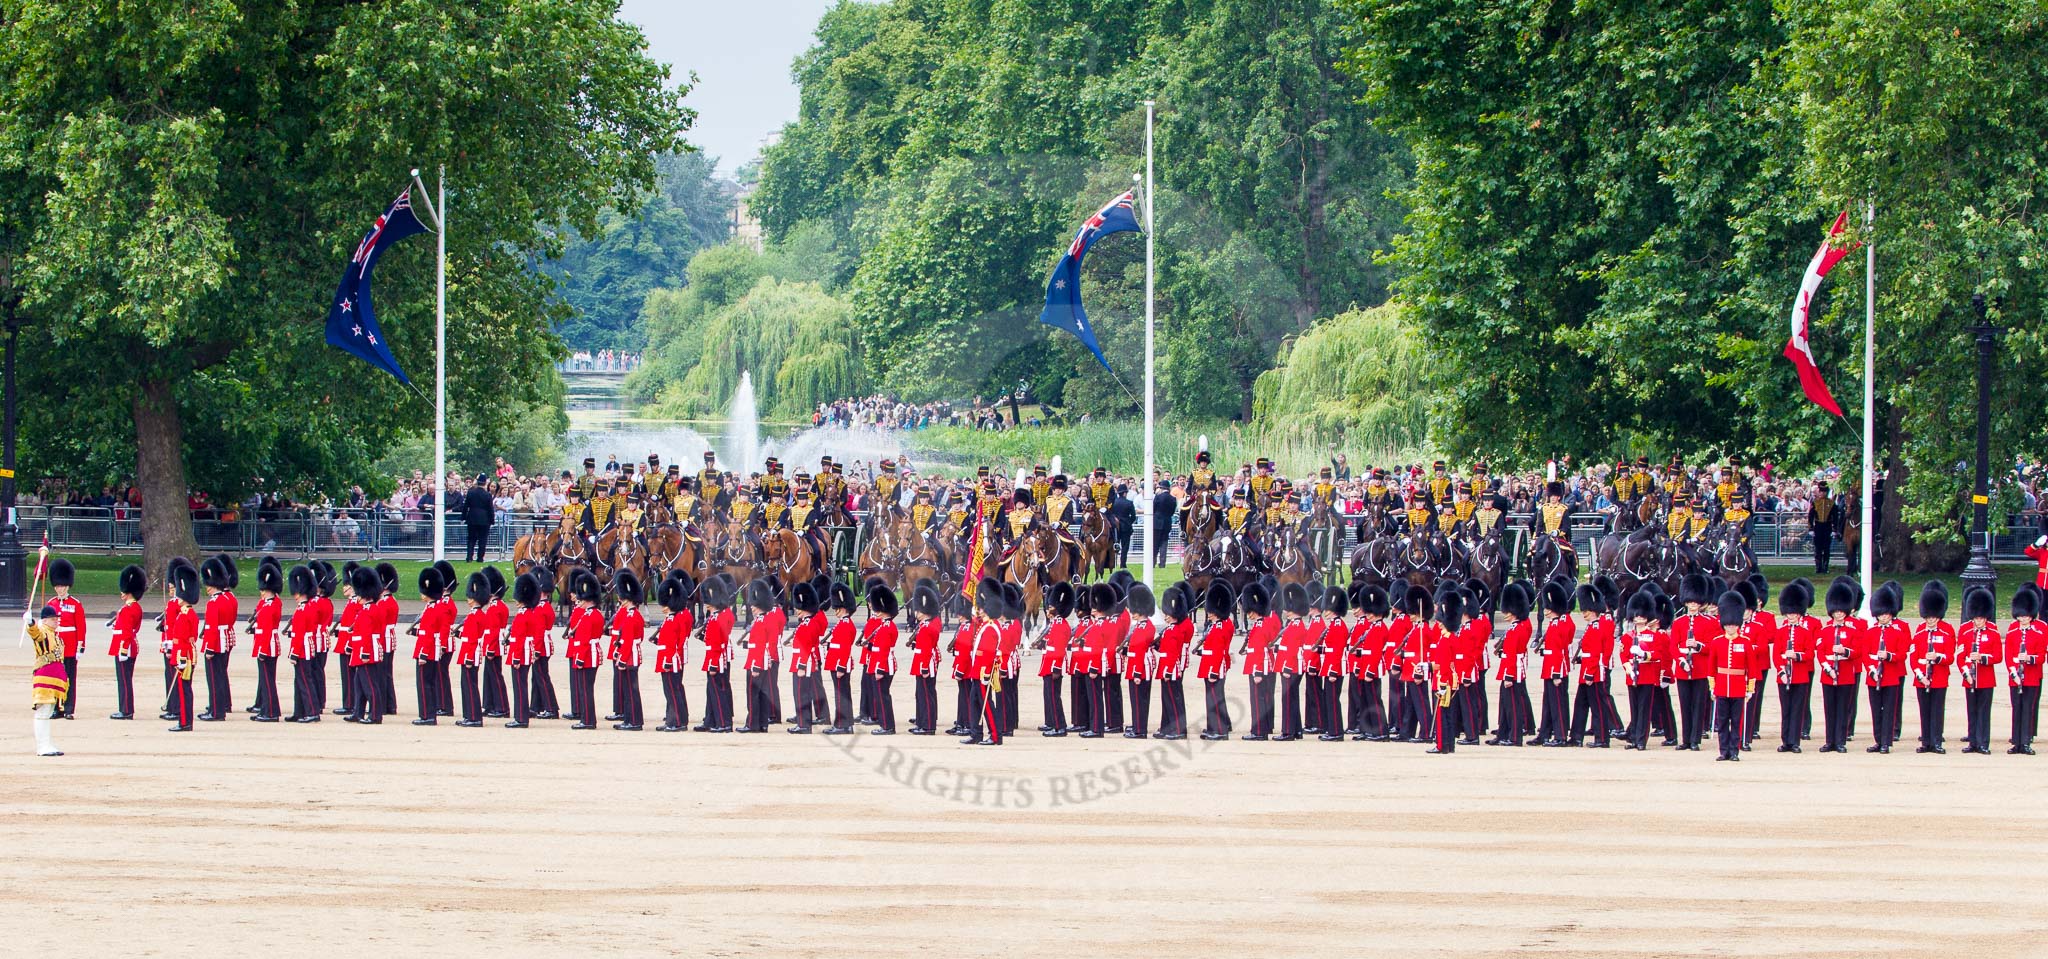 Trooping the Colour 2014.
Horse Guards Parade, Westminster,
London SW1A,

United Kingdom,
on 14 June 2014 at 11:29, image #576